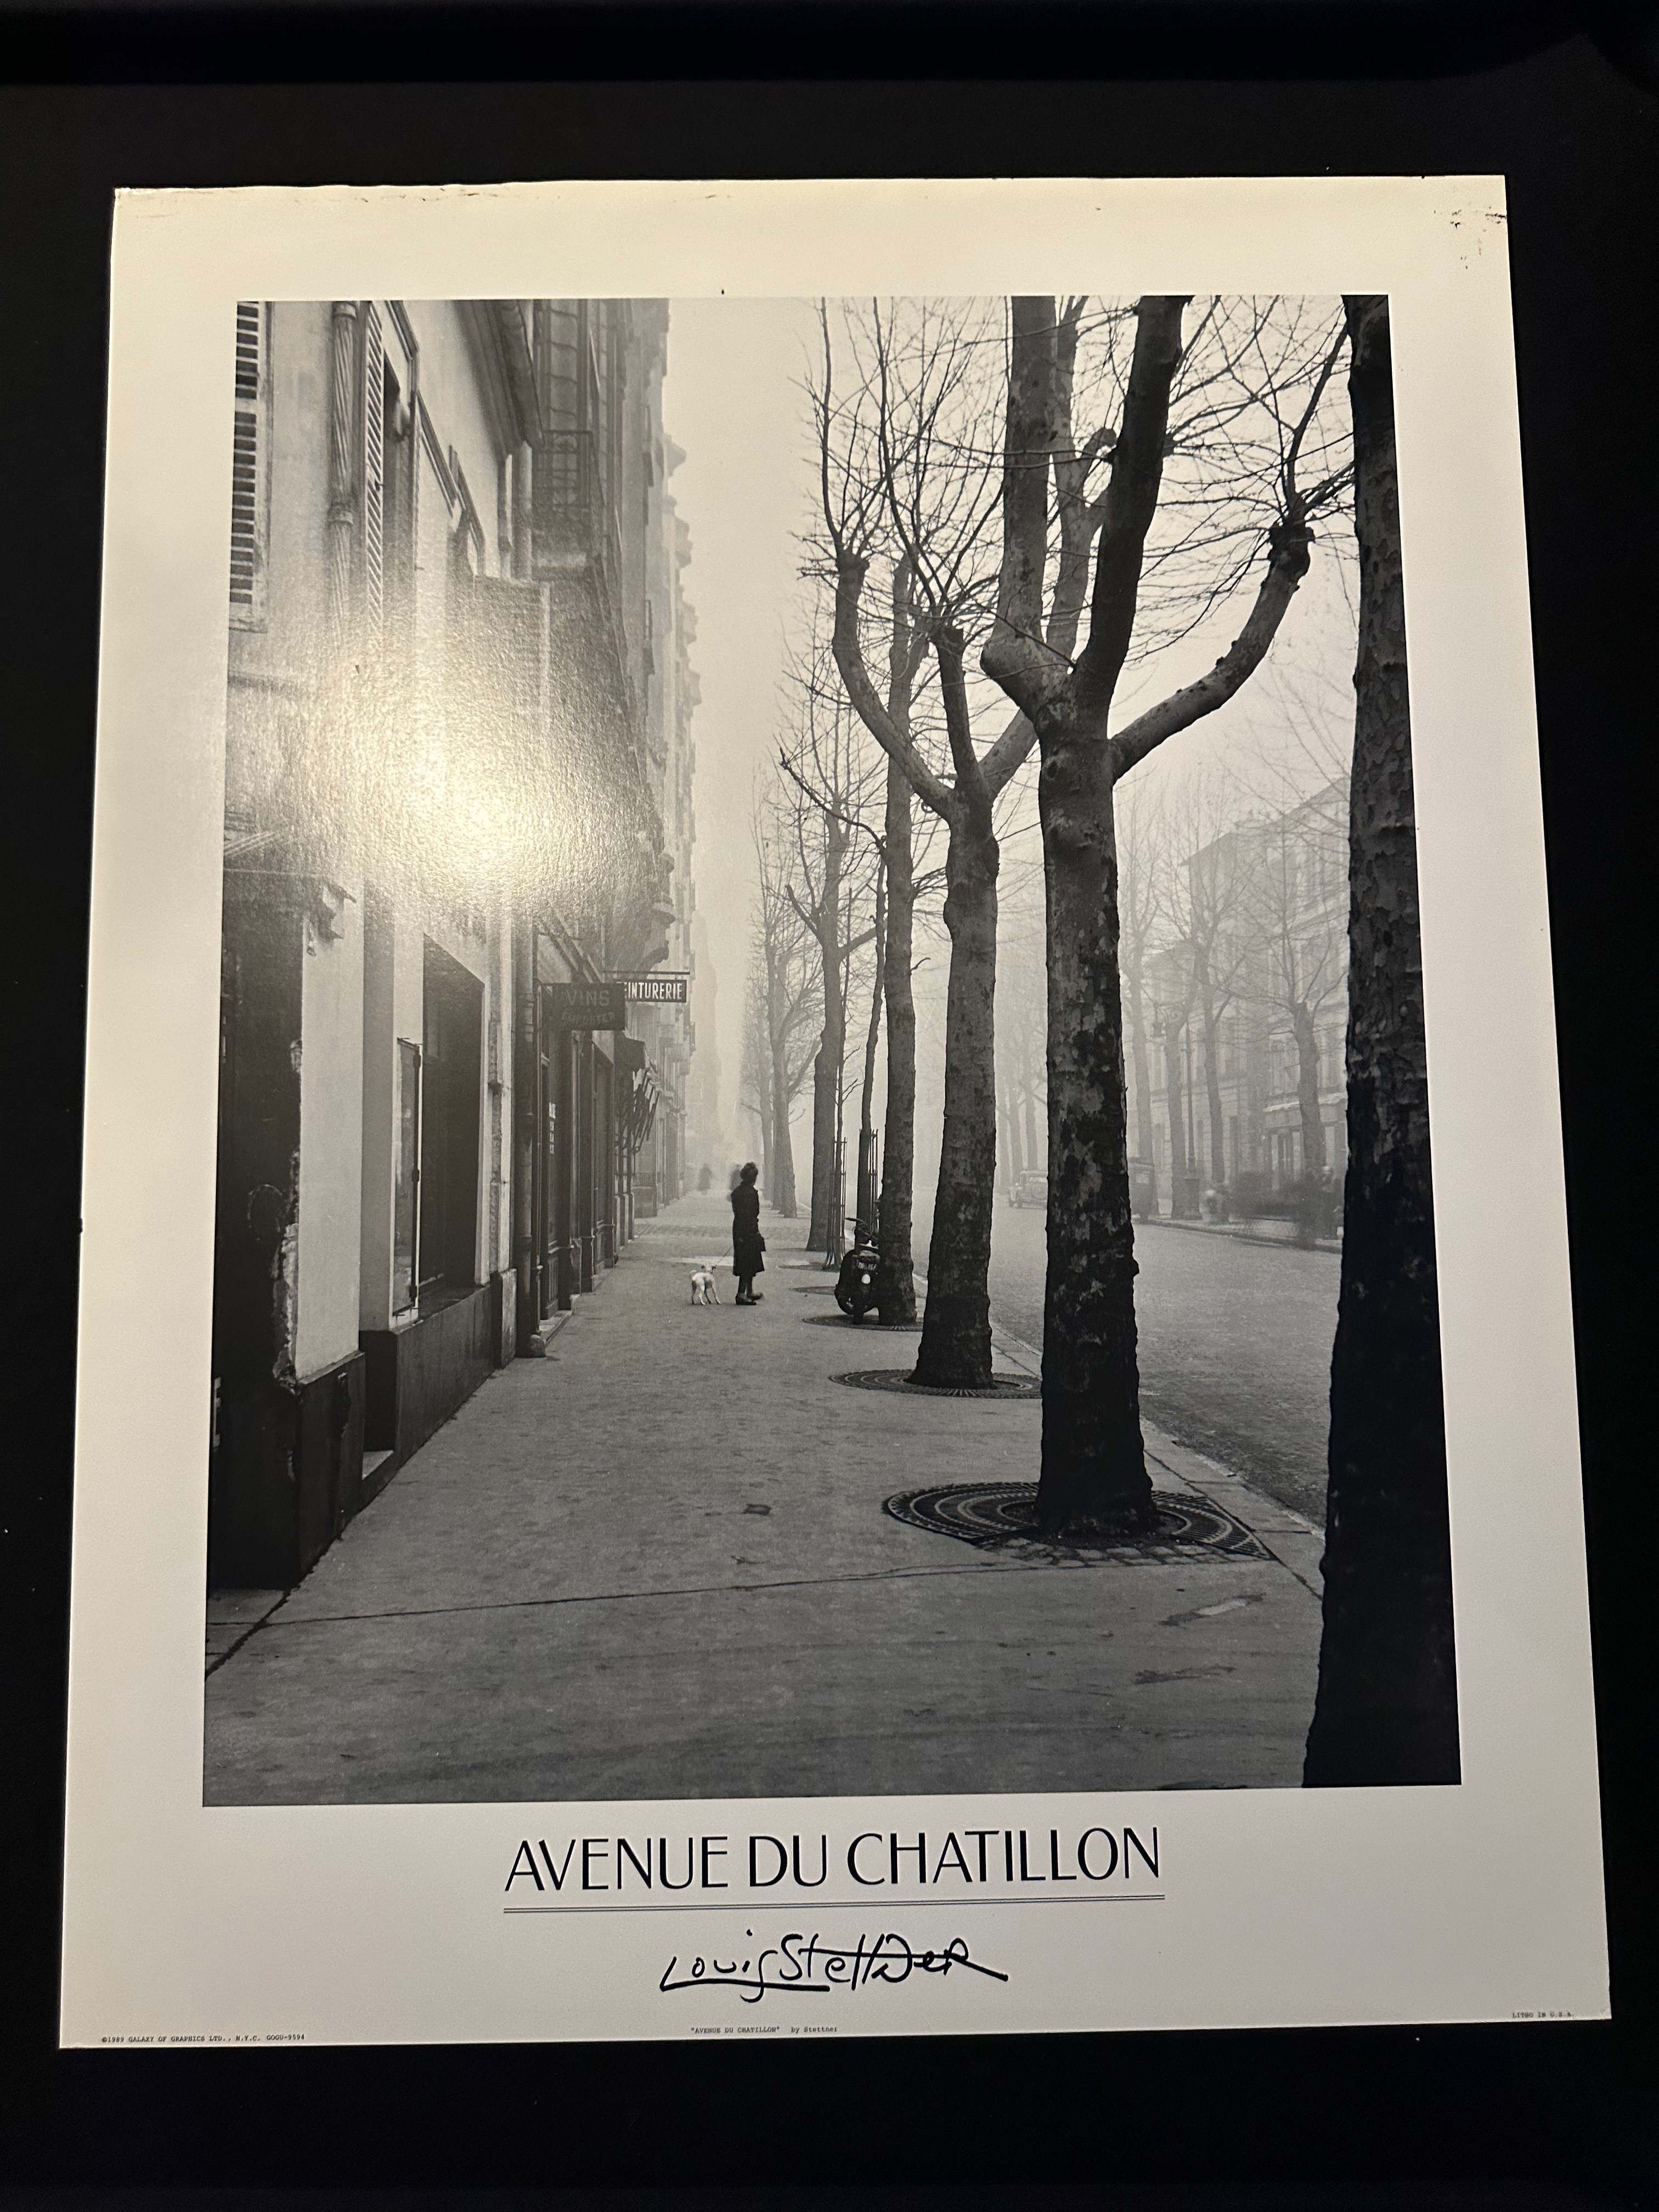 Four x Avenue Du Chatillon By Louis Stettner, 1989 Galaxy of Graphics Ltd, Litho U.S.A. - Image 13 of 16